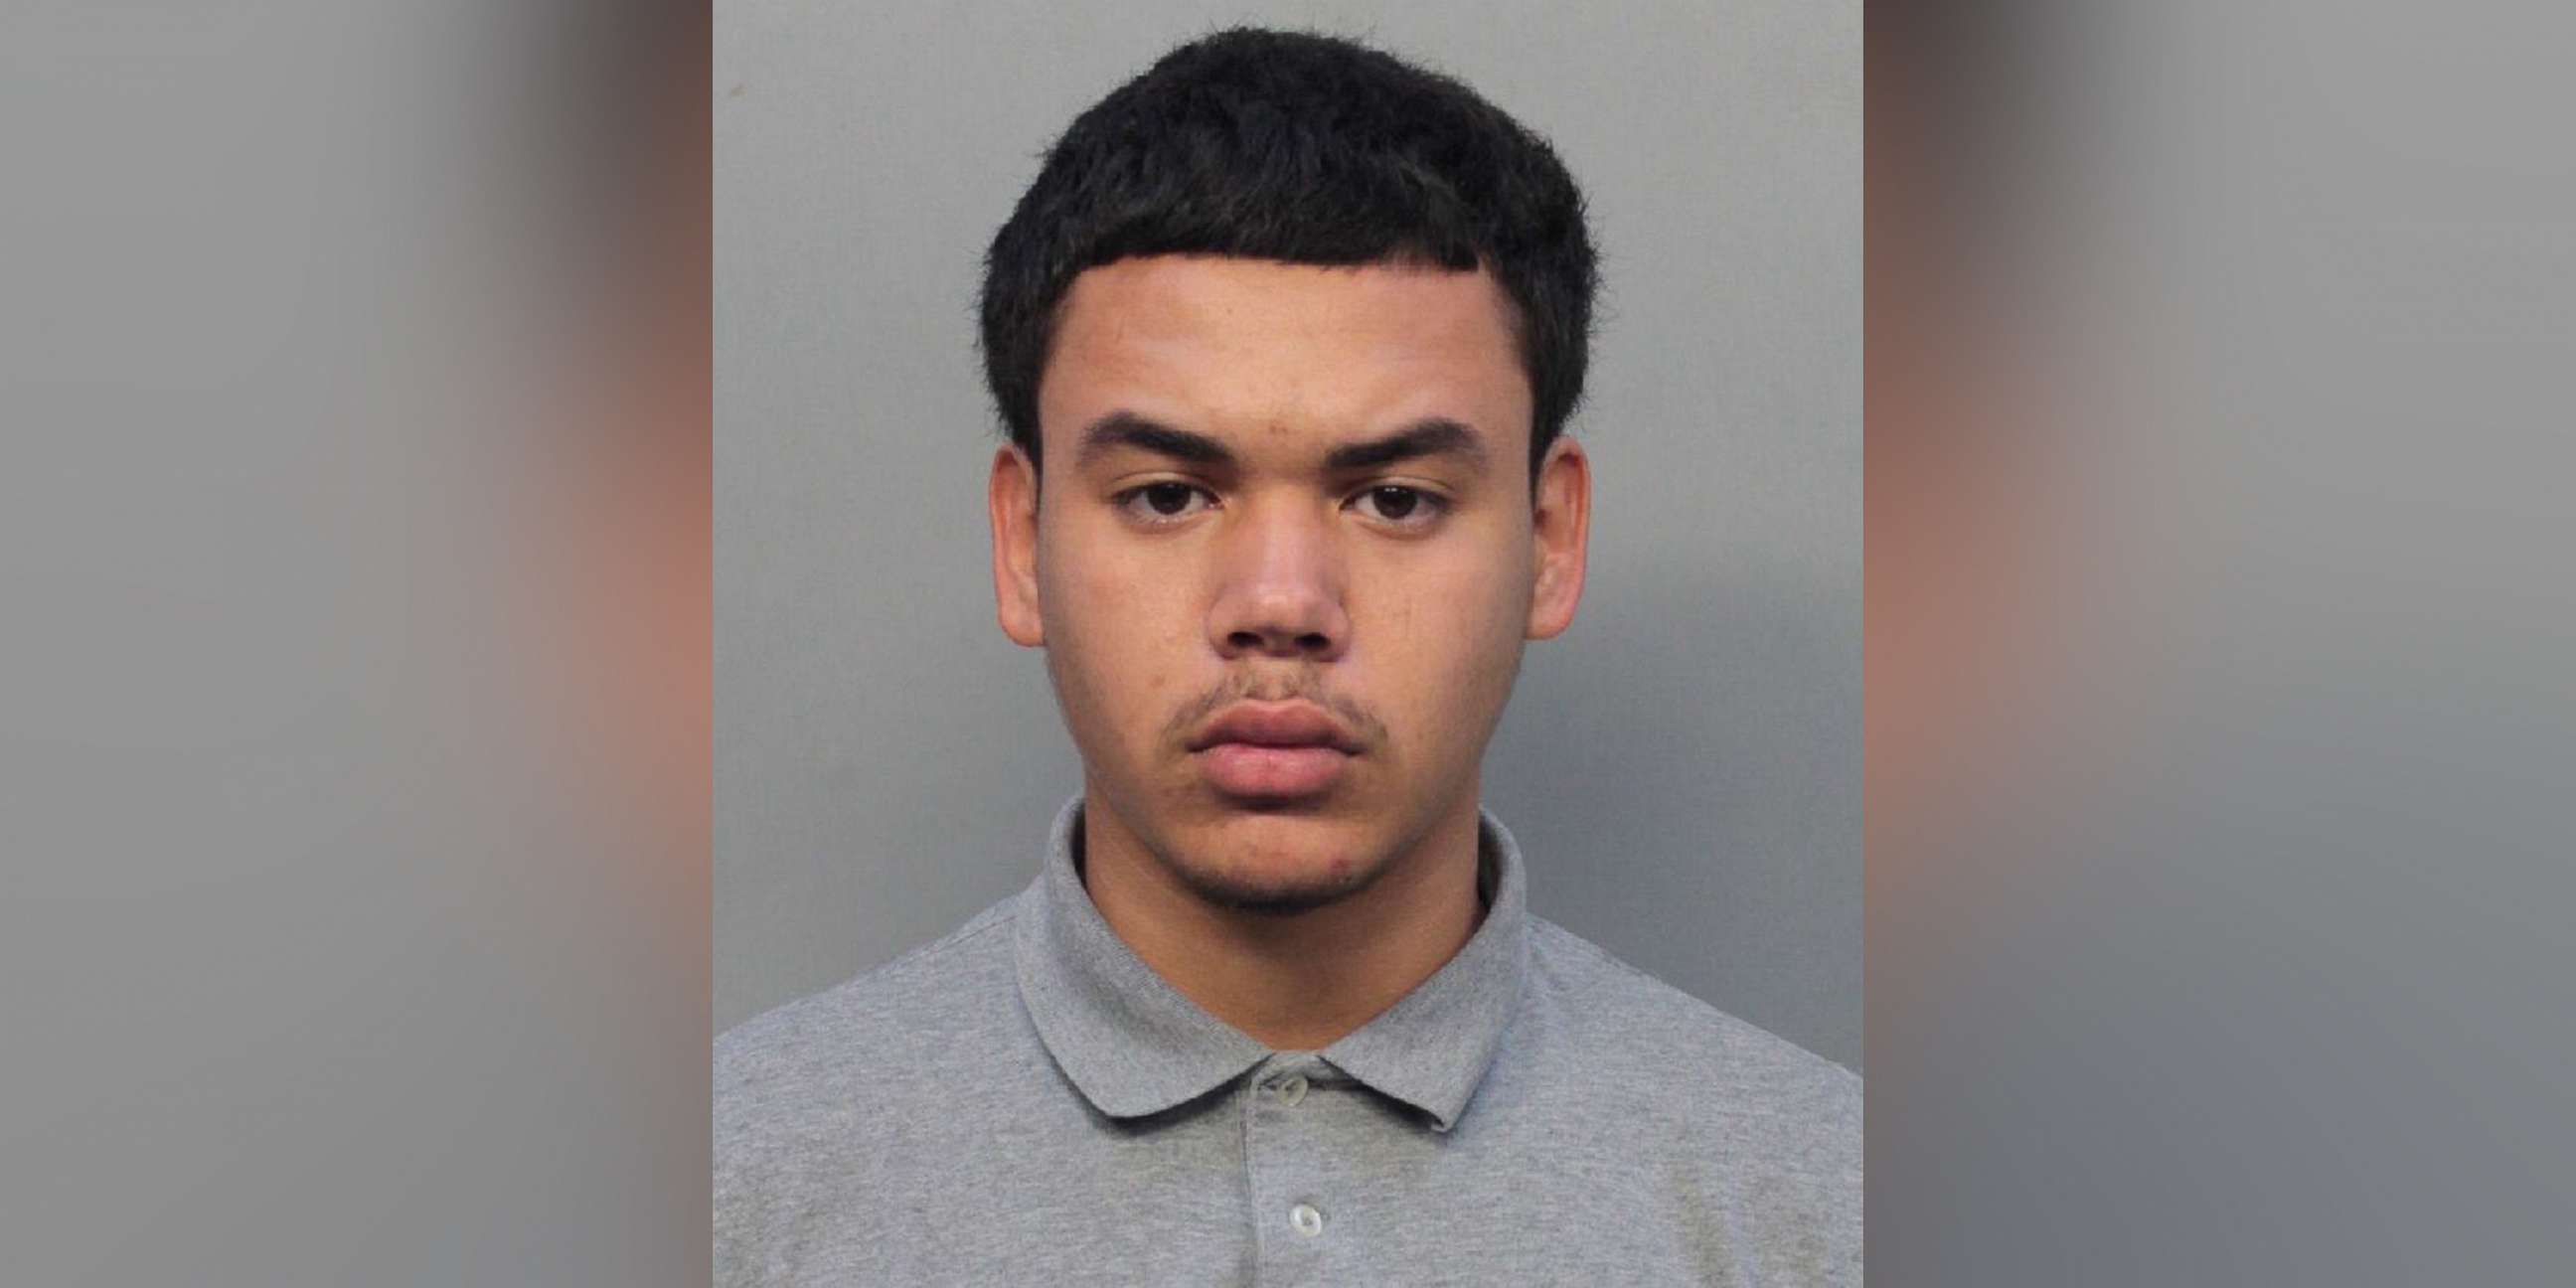 PHOTO: Miami-Dade Police arrested Gianny Sosa-Hernandez, 18, on April 15, 2019, after a video was posted to social media showing him wrestling a fake alligator at a shopping mall.